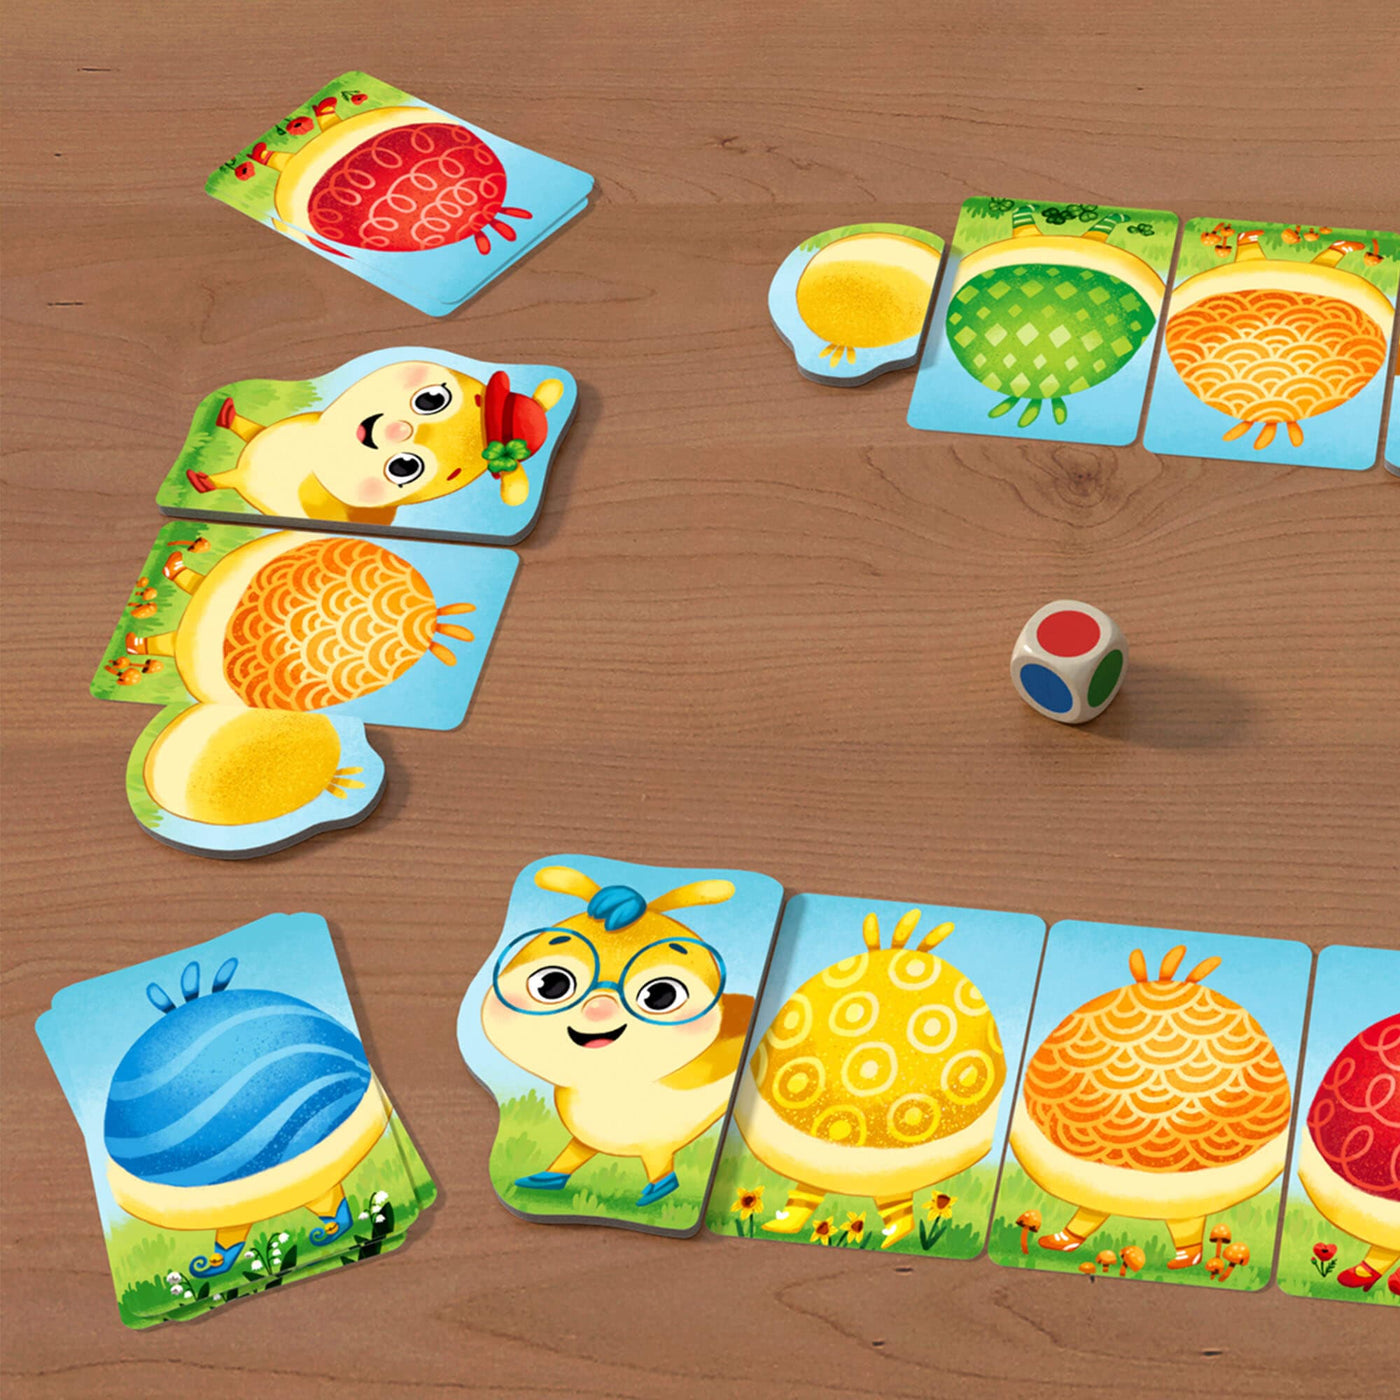 Rainbow Caterpillar game with wooden die on table